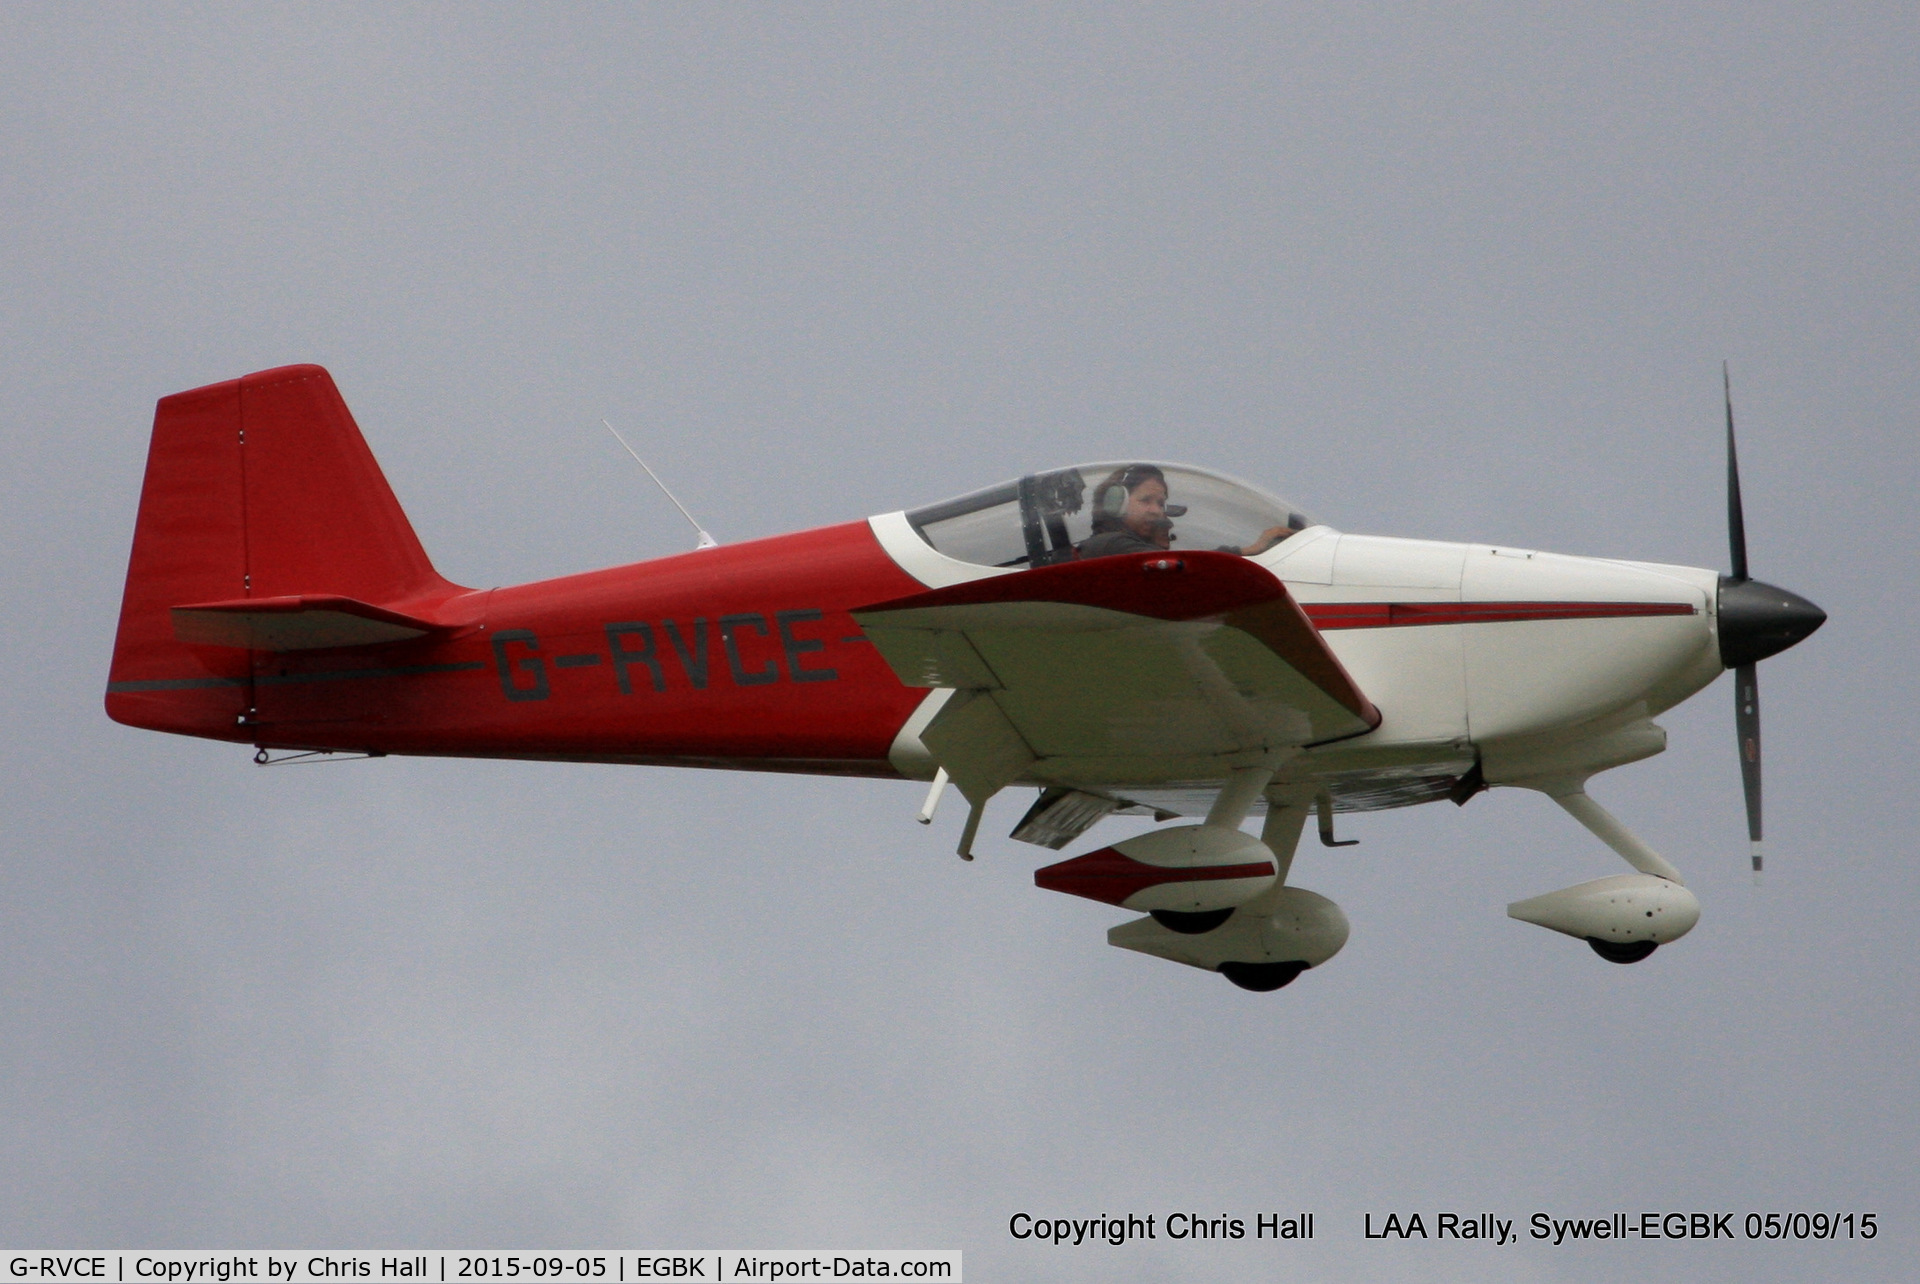 G-RVCE, 2001 Vans RV-6A C/N PFA 181-13372, at the LAA Rally 2015, Sywell